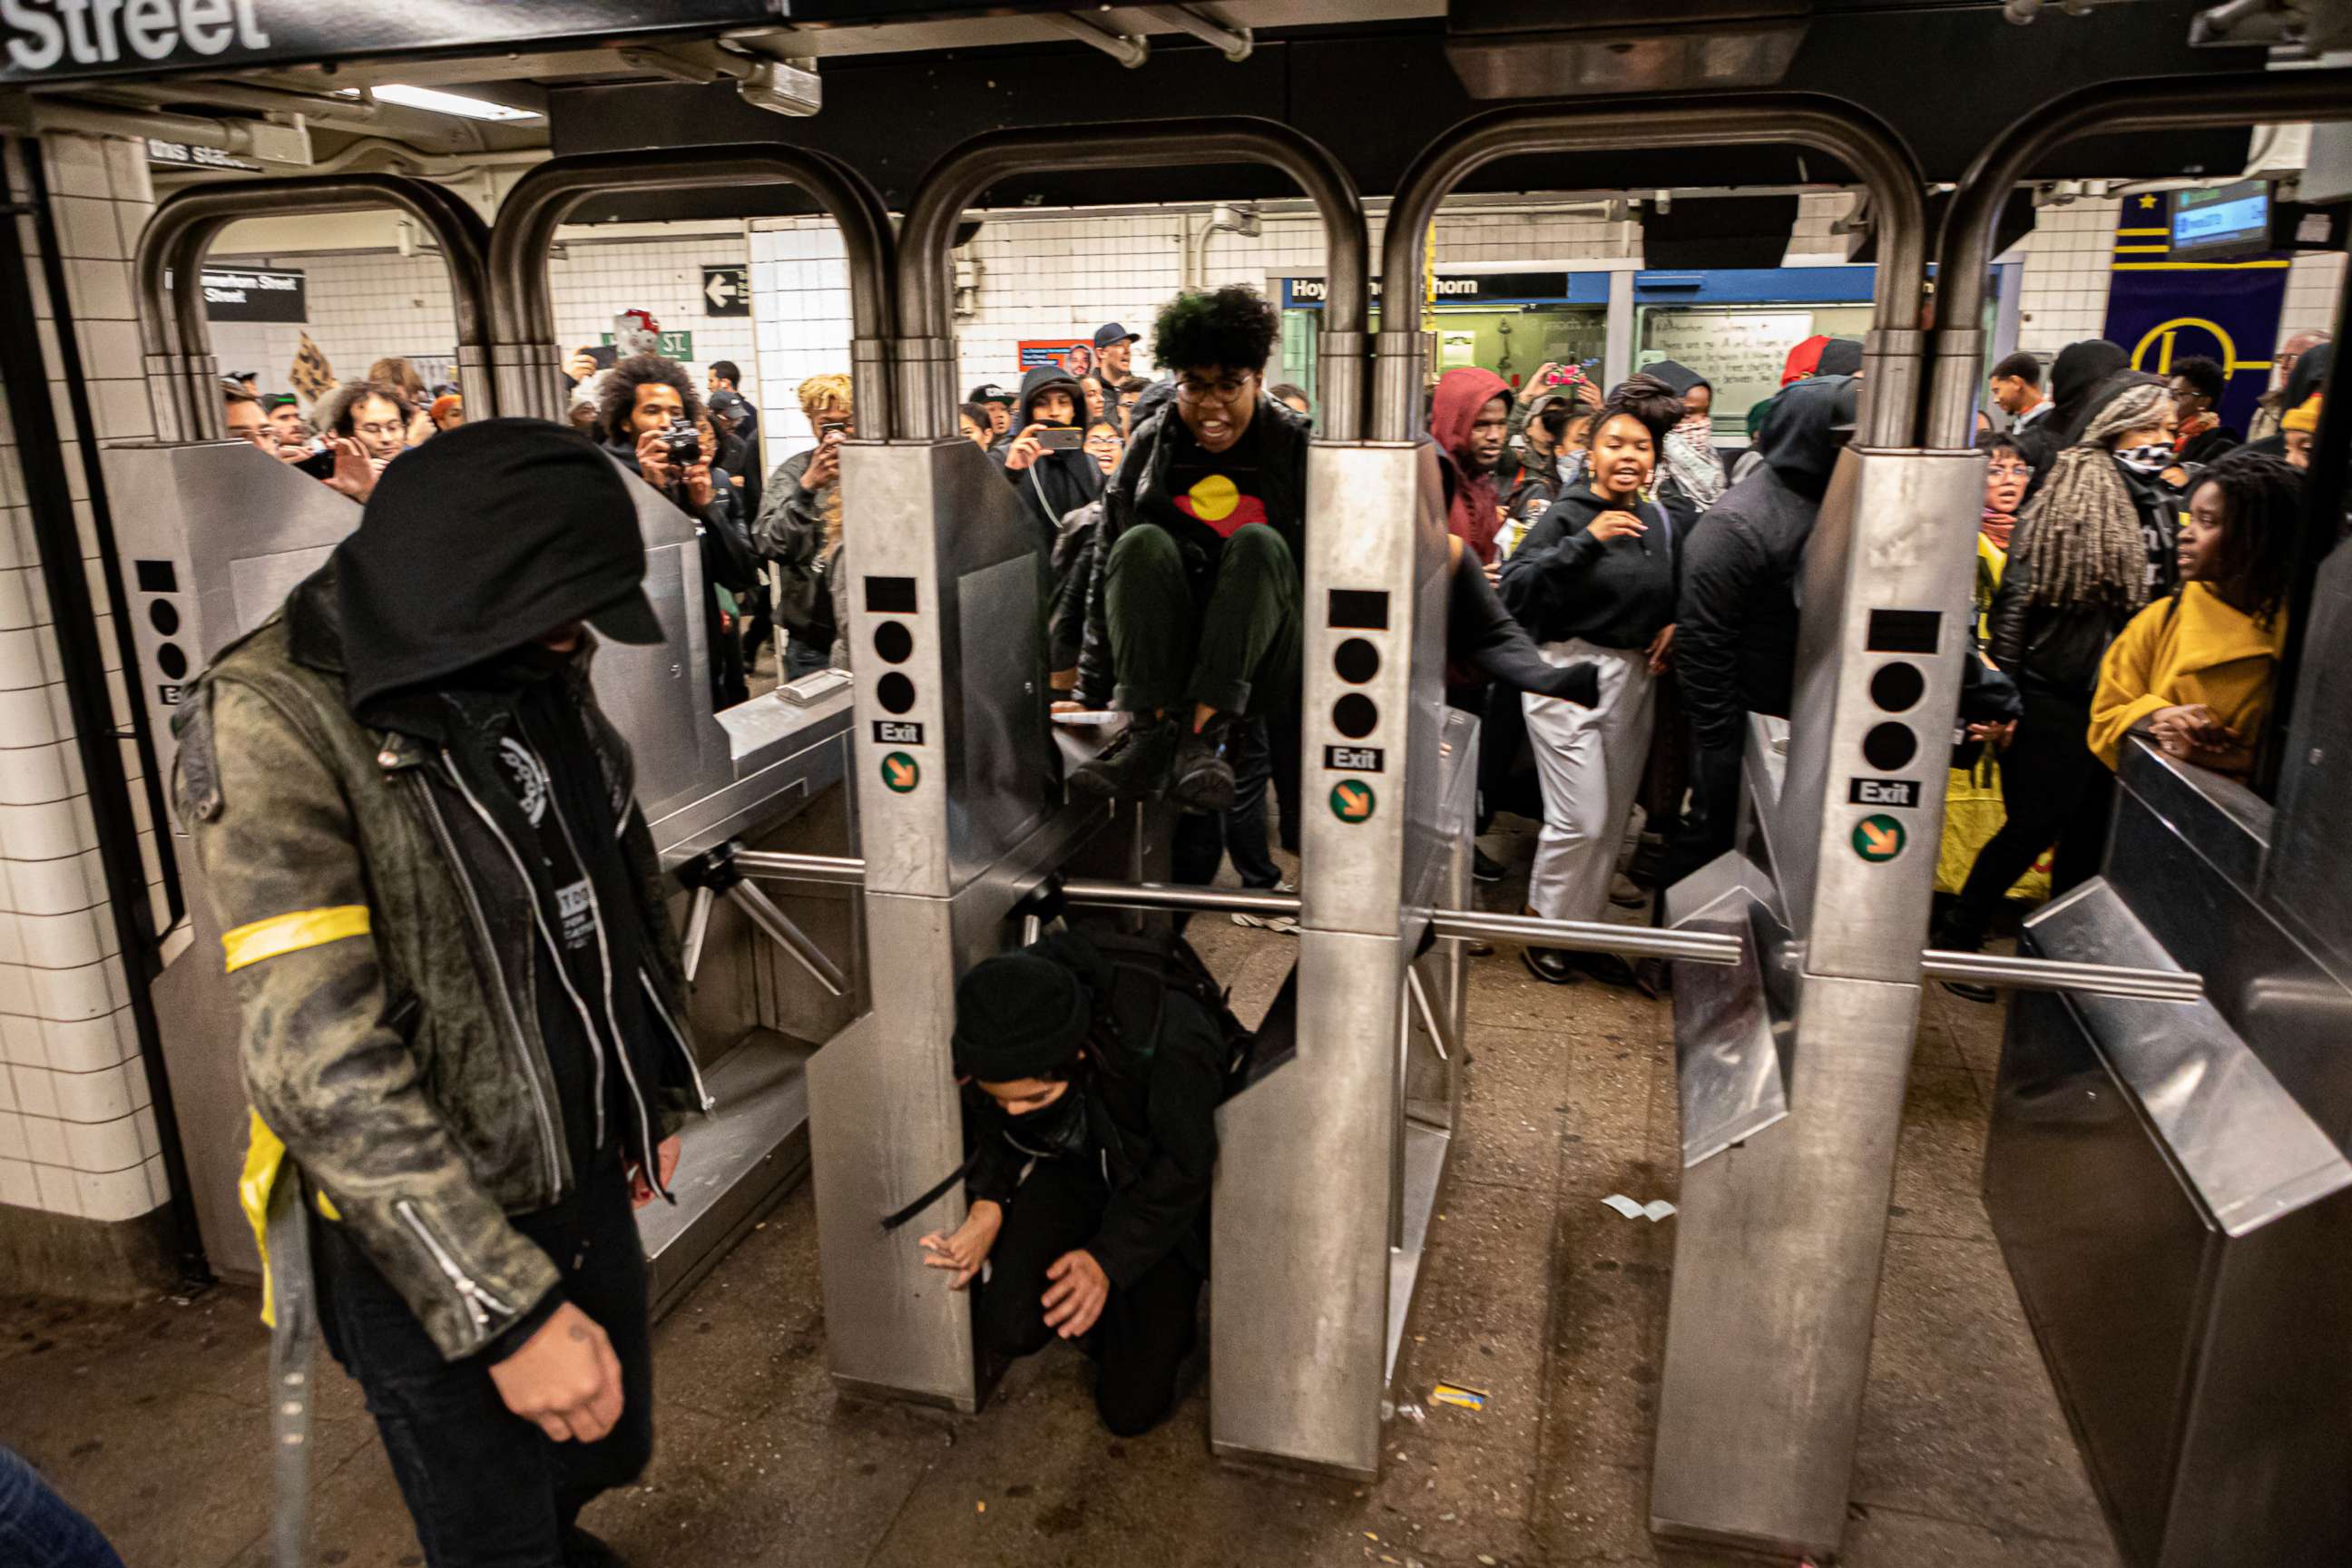 PHOTO: People pass through a subway station in Brooklyn, New York, during a protest against the New York City Police department organized by the activist group Decolonize This Place, Nov. 2, 2019.